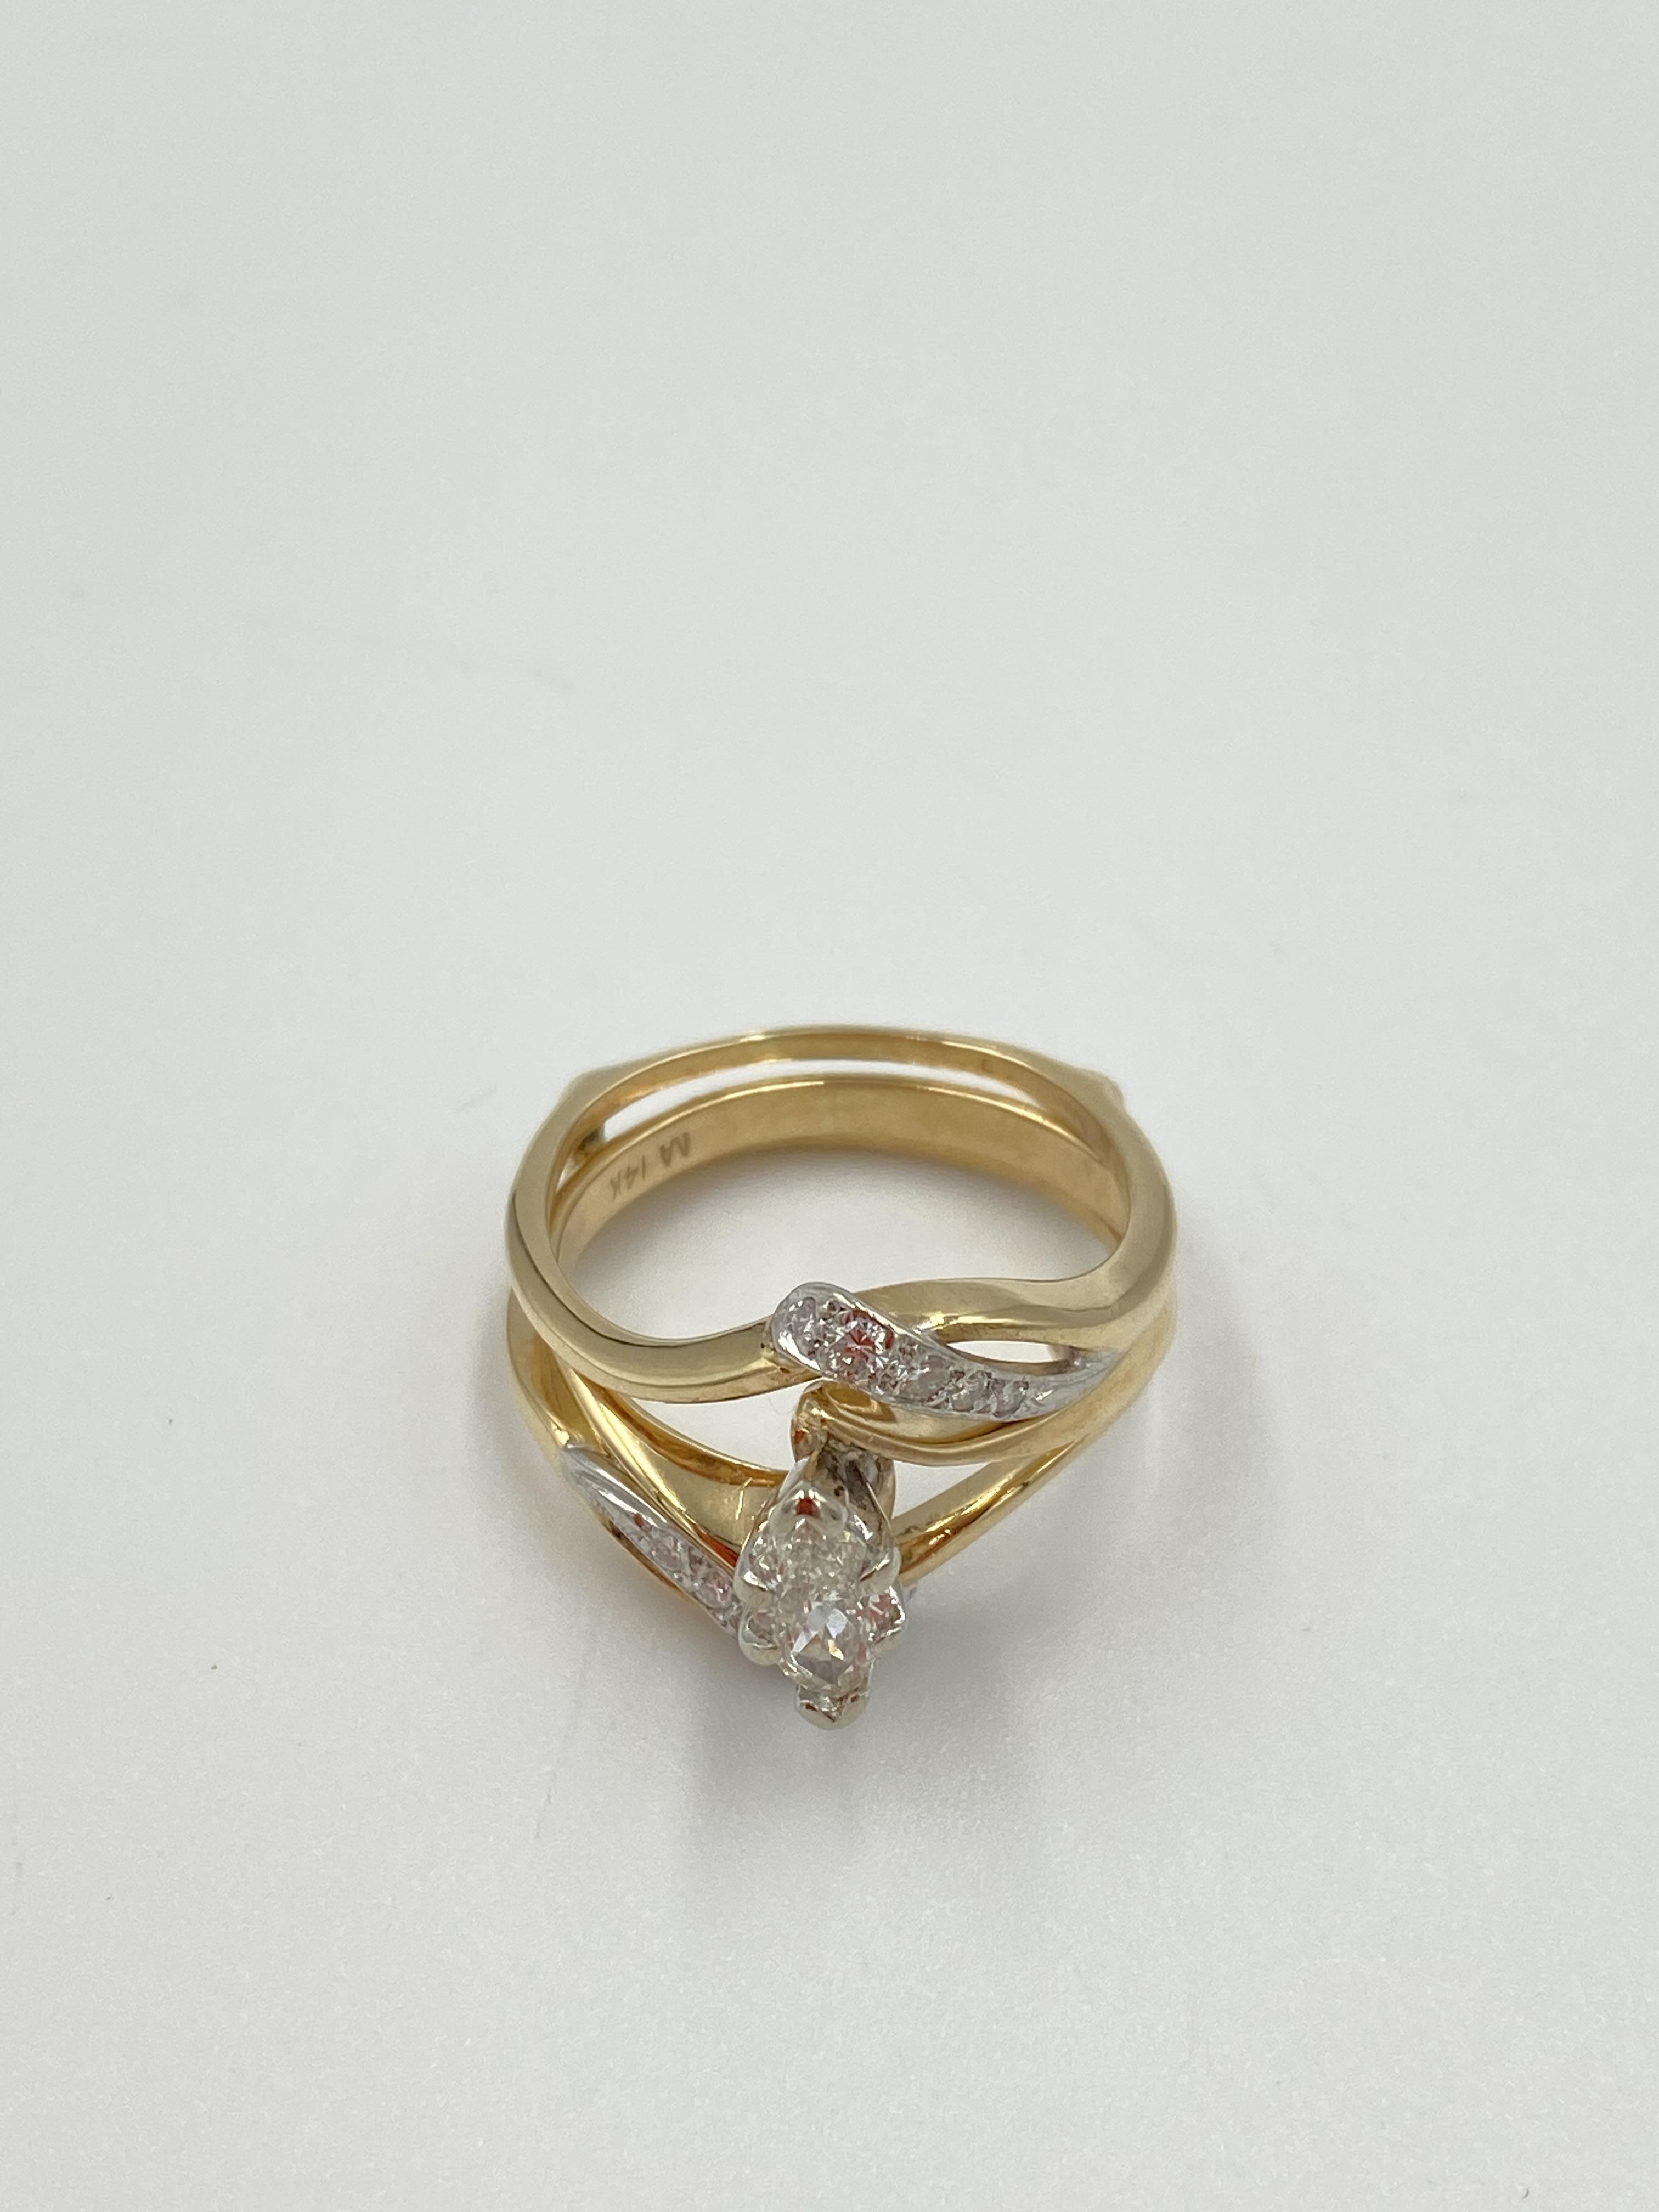 14ct gold and diamond ring - Image 2 of 6